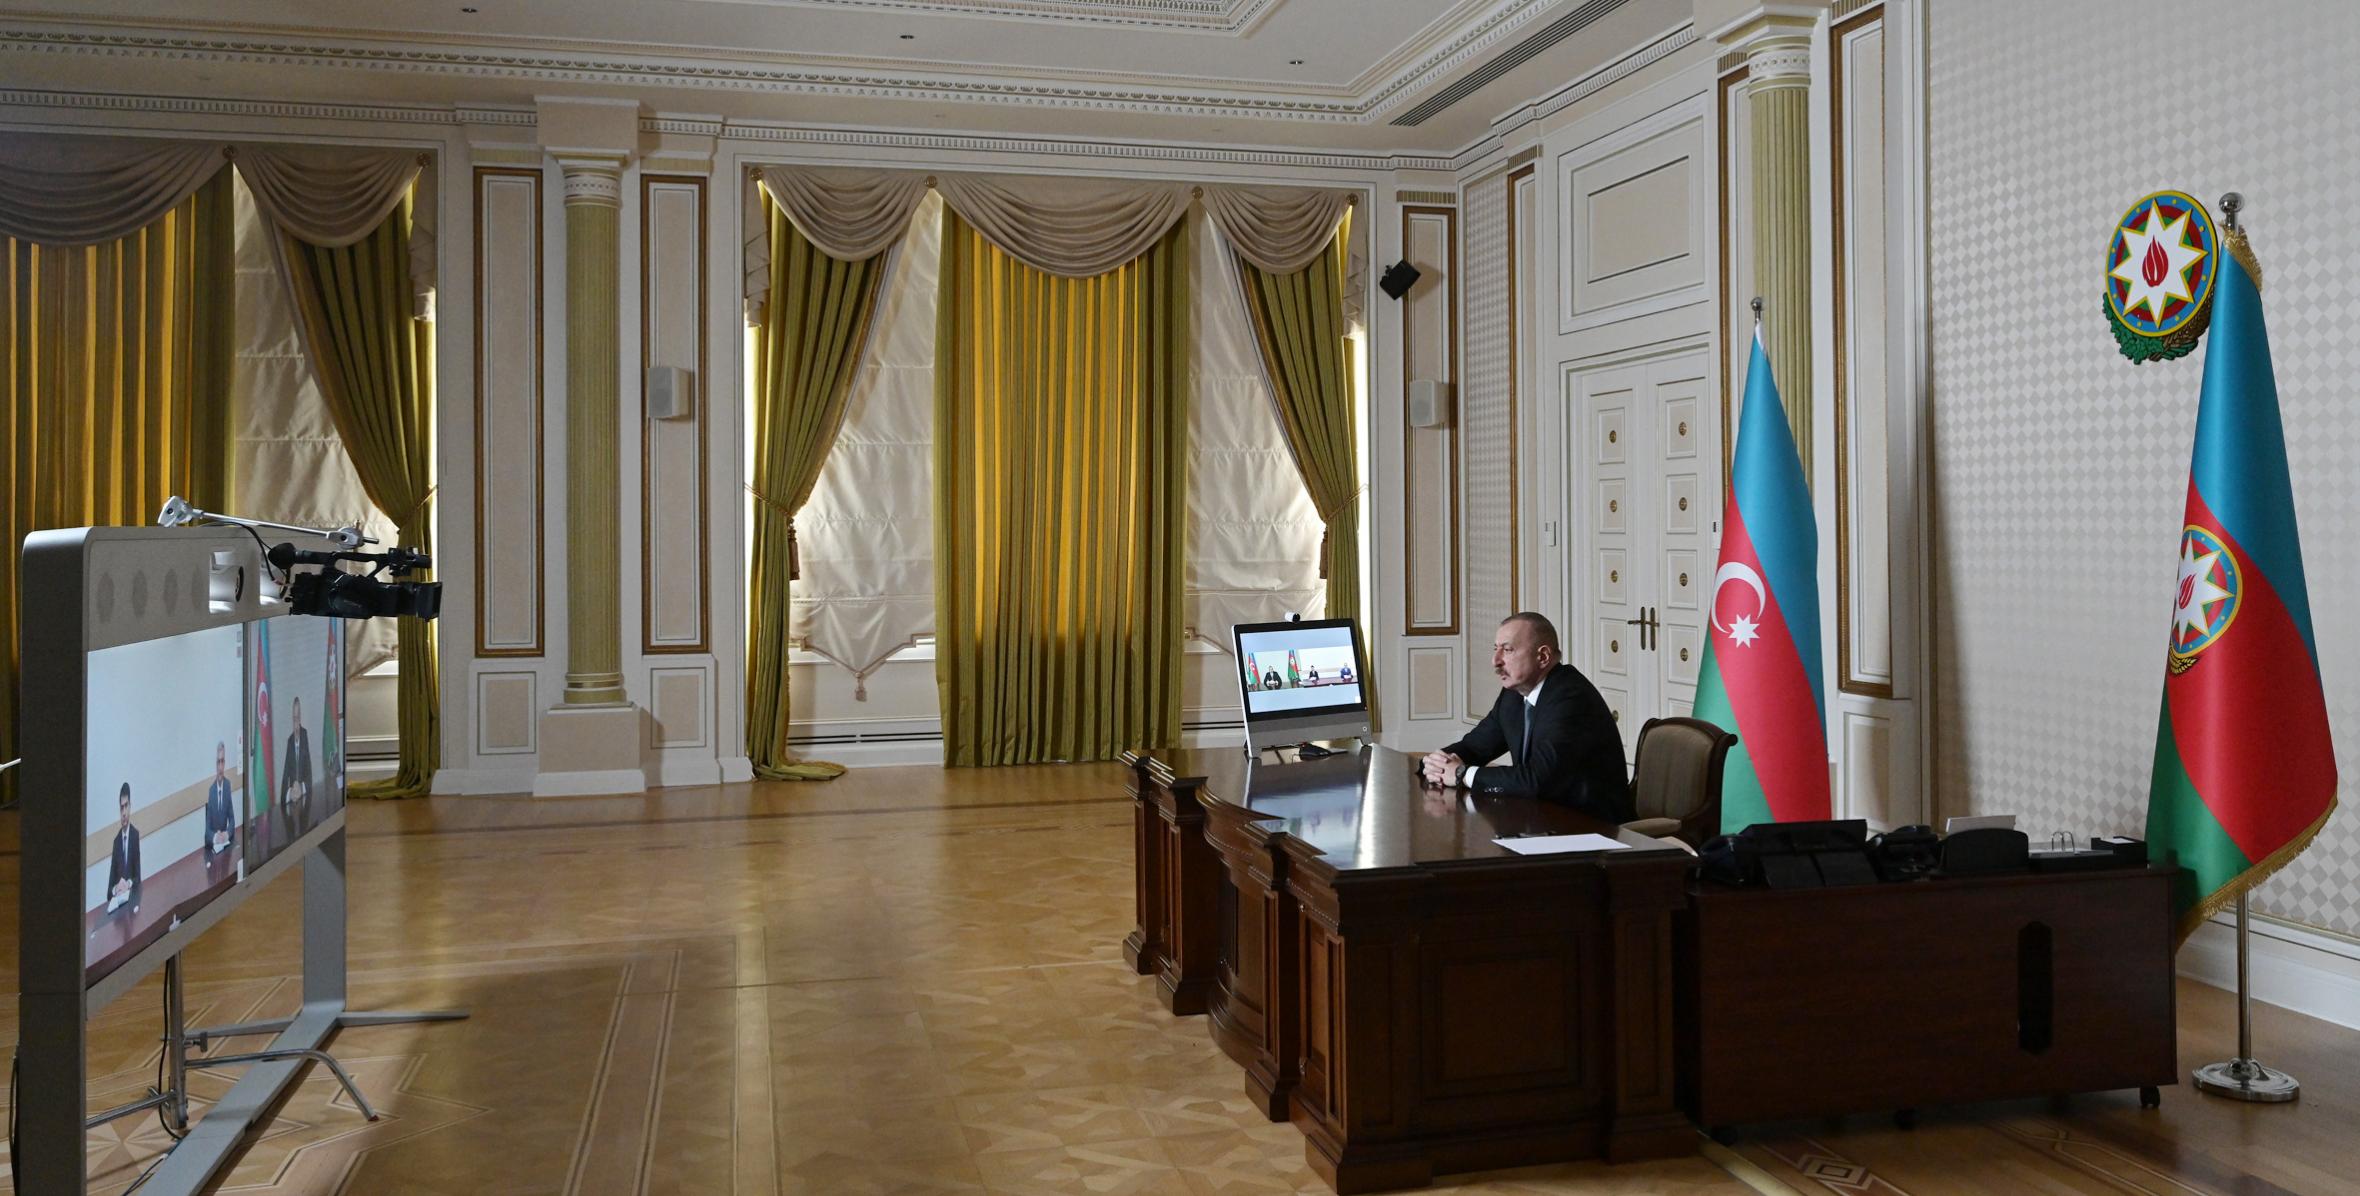 Ilham Aliyev received Seymur Orujov on his appointment as head of Aghstafa District Executive Authority and Elchin Rzayev on his appointment as head of Imishli District Executive Authority in a video format